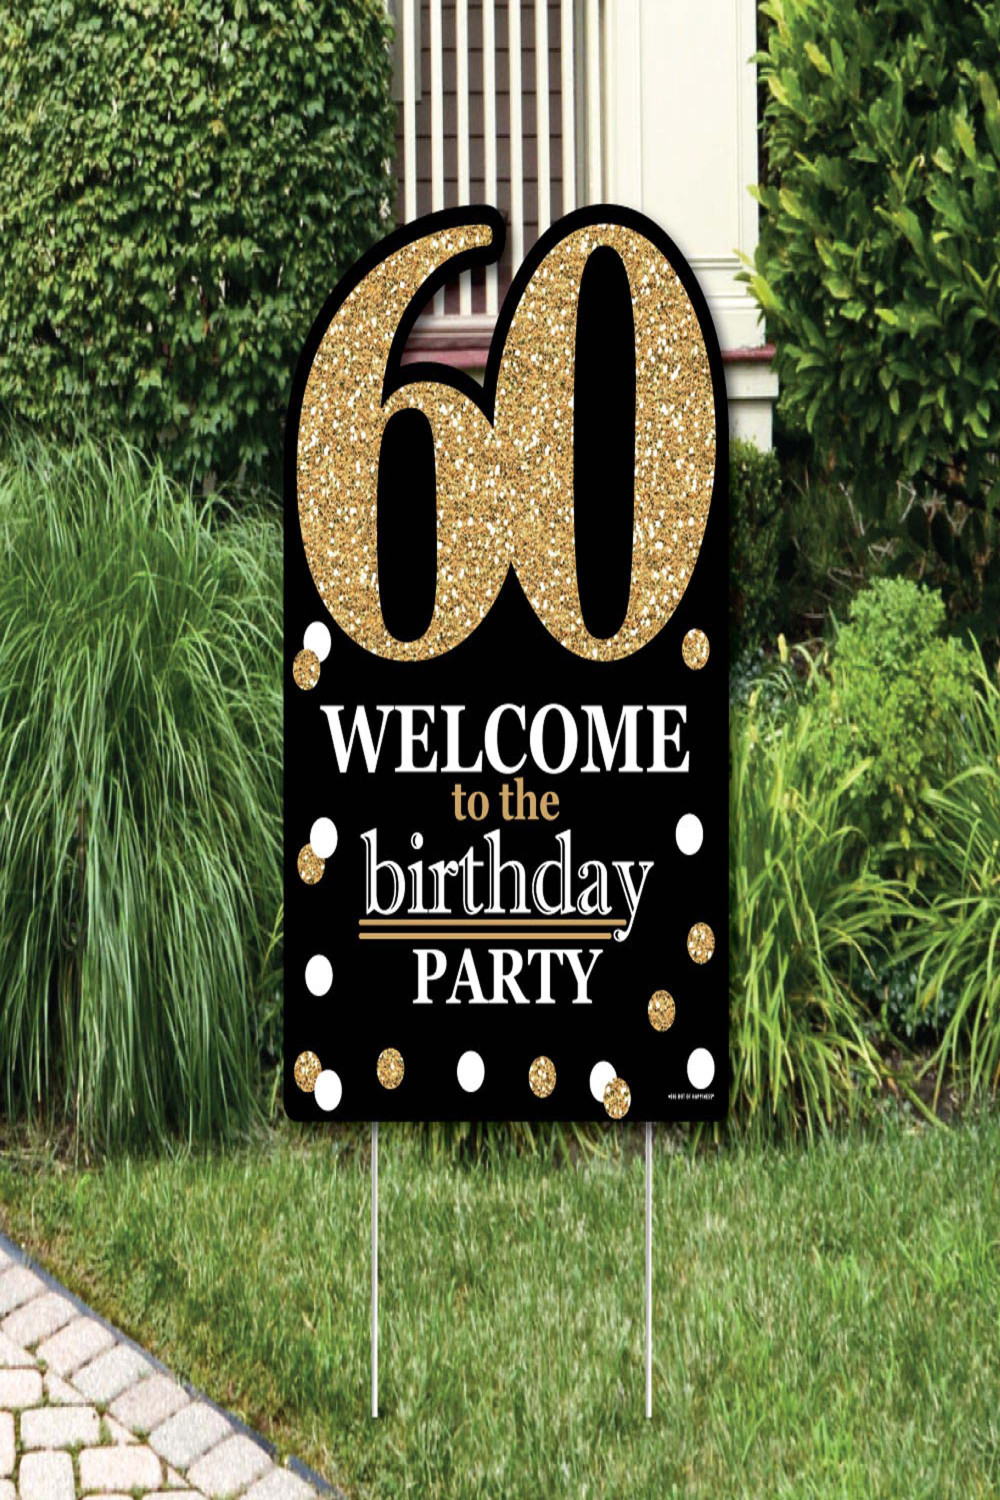 Big Dot of Happiness Adult th Birthday - Gold - Party Decorations -  Birthday Party Welcome Yard Sign